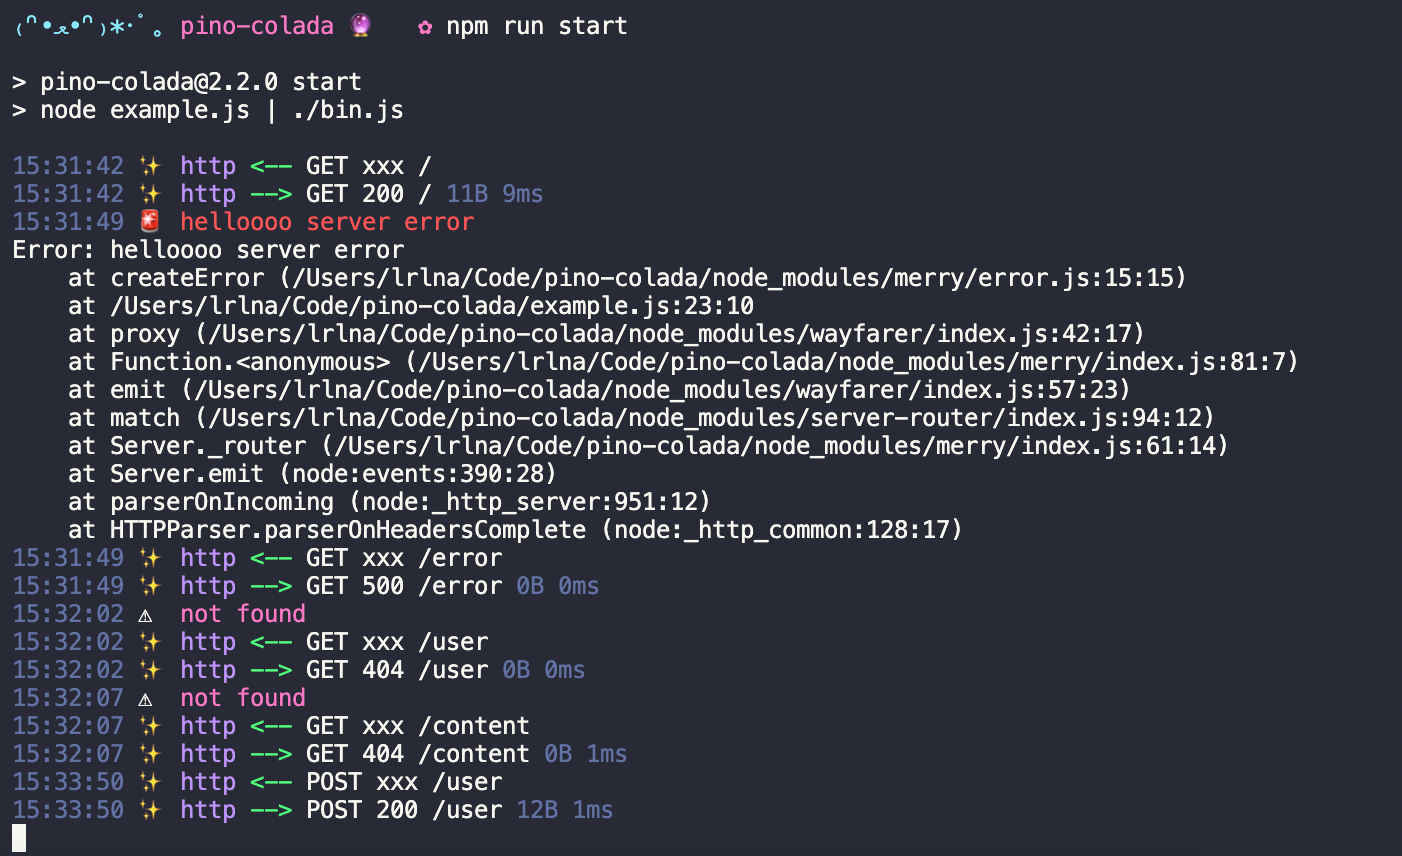 An example of pino-colada terminal output. The output shows timestamps, messages, stack traces, all colourised for ease of reading. The exact output is as follows:
15:31:42 ✨ http <-- GET xxx /
15:31:42 ✨ http --> GET 200 / 11B 9ms
15:31:49 🚨 helloooo server error 
Error: helloooo server error
at createError (/Users/lrlna/Code/pino-colada/node_modules/merry/error.js:15:15)
at /Users/lrlna/Code/pino-colada/example.js:23:10
at proxy (/Users/lrlna/Code/pino-colada/node_modules/wayfarer/index.js:42:17)
at Function.<anonymous> (/Users/lrlna/Code/pino-colada/node_modules/merry/index.js:81:7)
at emit (/Users/lrlna/Code/pino-colada/node_modules/wayfarer/index.js:57:23)
at match (/Users/lrlna/Code/pino-colada/node_modules/server-router/index.js:94:12)
at Server._router (/Users/lrlna/Code/pino-colada/node_modules/merry/index.js:61:14)
at Server.emit (node:events:390:28)
at parserOnIncoming (node:_http_server:951:12)
at HTTPParser.parserOnHeadersComplete (node:_http_common:128:17)
15:31:49 ✨ http <-- GET xxx /error
15:31:49 ✨ http --> GET 500 /error 0B 0ms
15:32:02 ⚠️  not found
15:32:02 ✨ http <-- GET xxx /user
15:32:02 ✨ http --> GET 404 /user 0B 0ms
15:32:07 ⚠️  not found
15:32:07 ✨ http <-- GET xxx /content
15:32:07 ✨ http --> GET 404 /content 0B 1ms
15:33:50 ✨ http <-- POST xxx /user
15:33:50 ✨ http --> POST 200 /user 12B 1ms